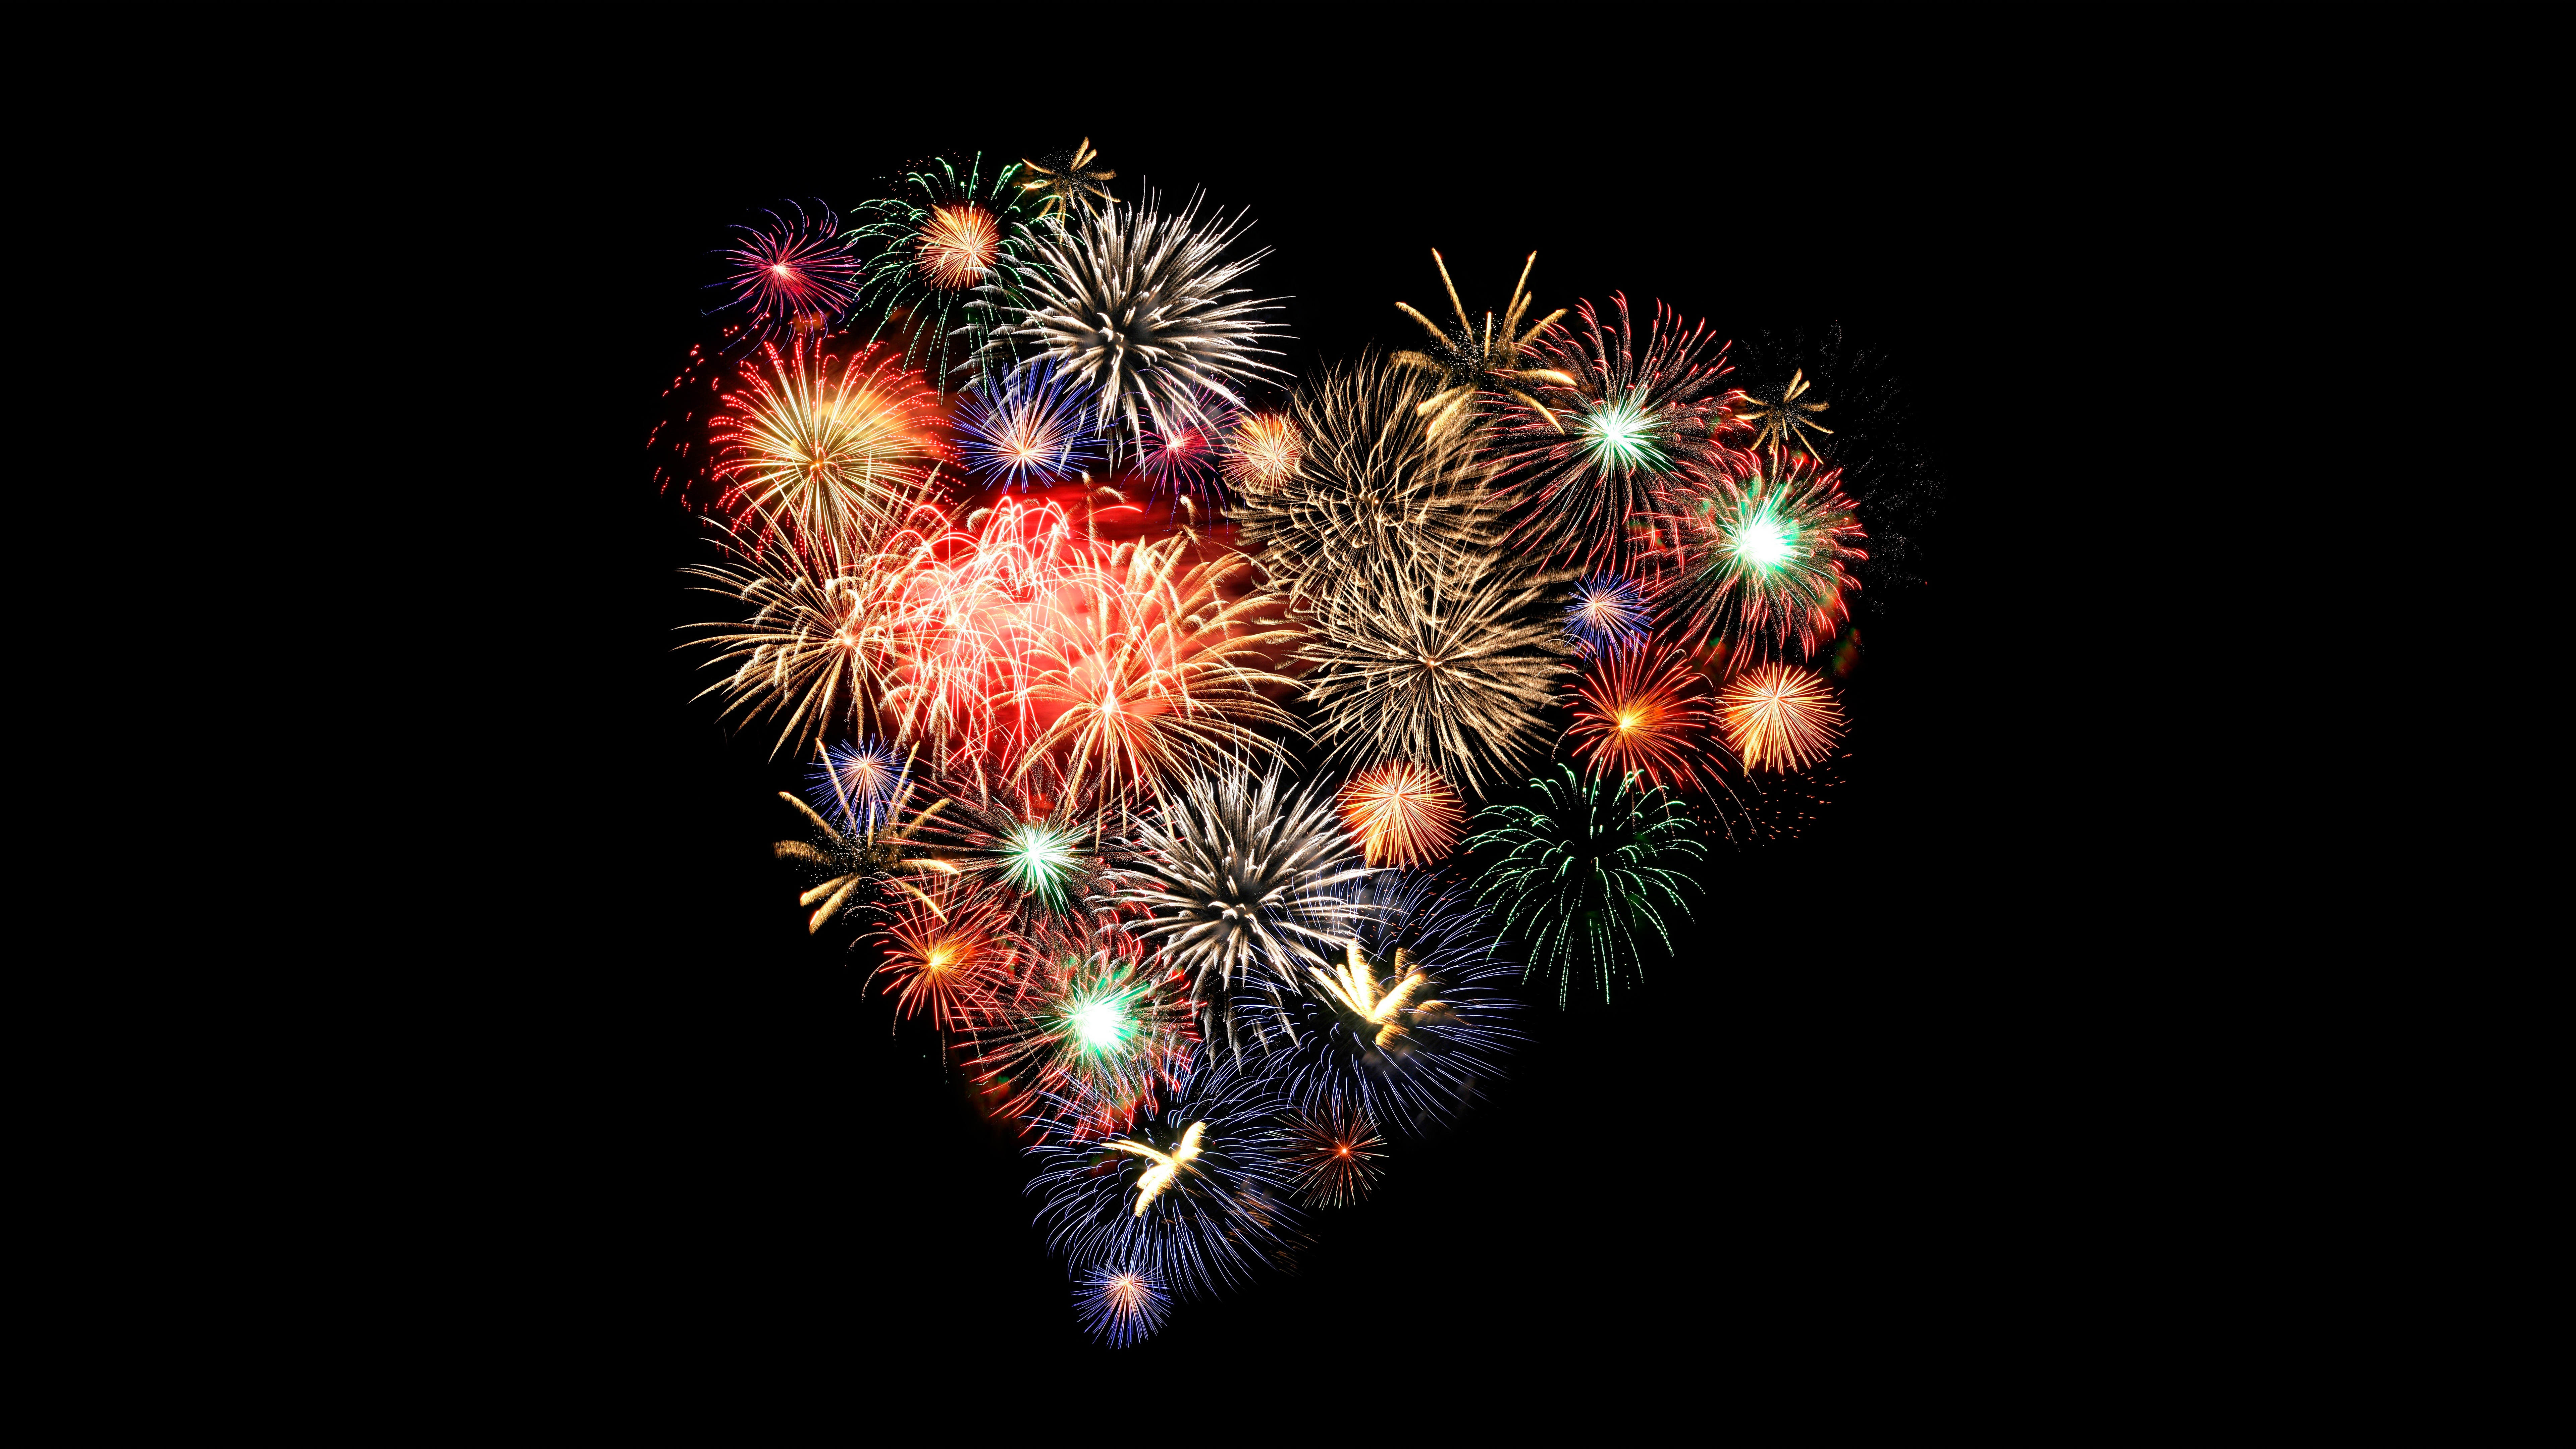 photography, fireworks, heart shaped, night